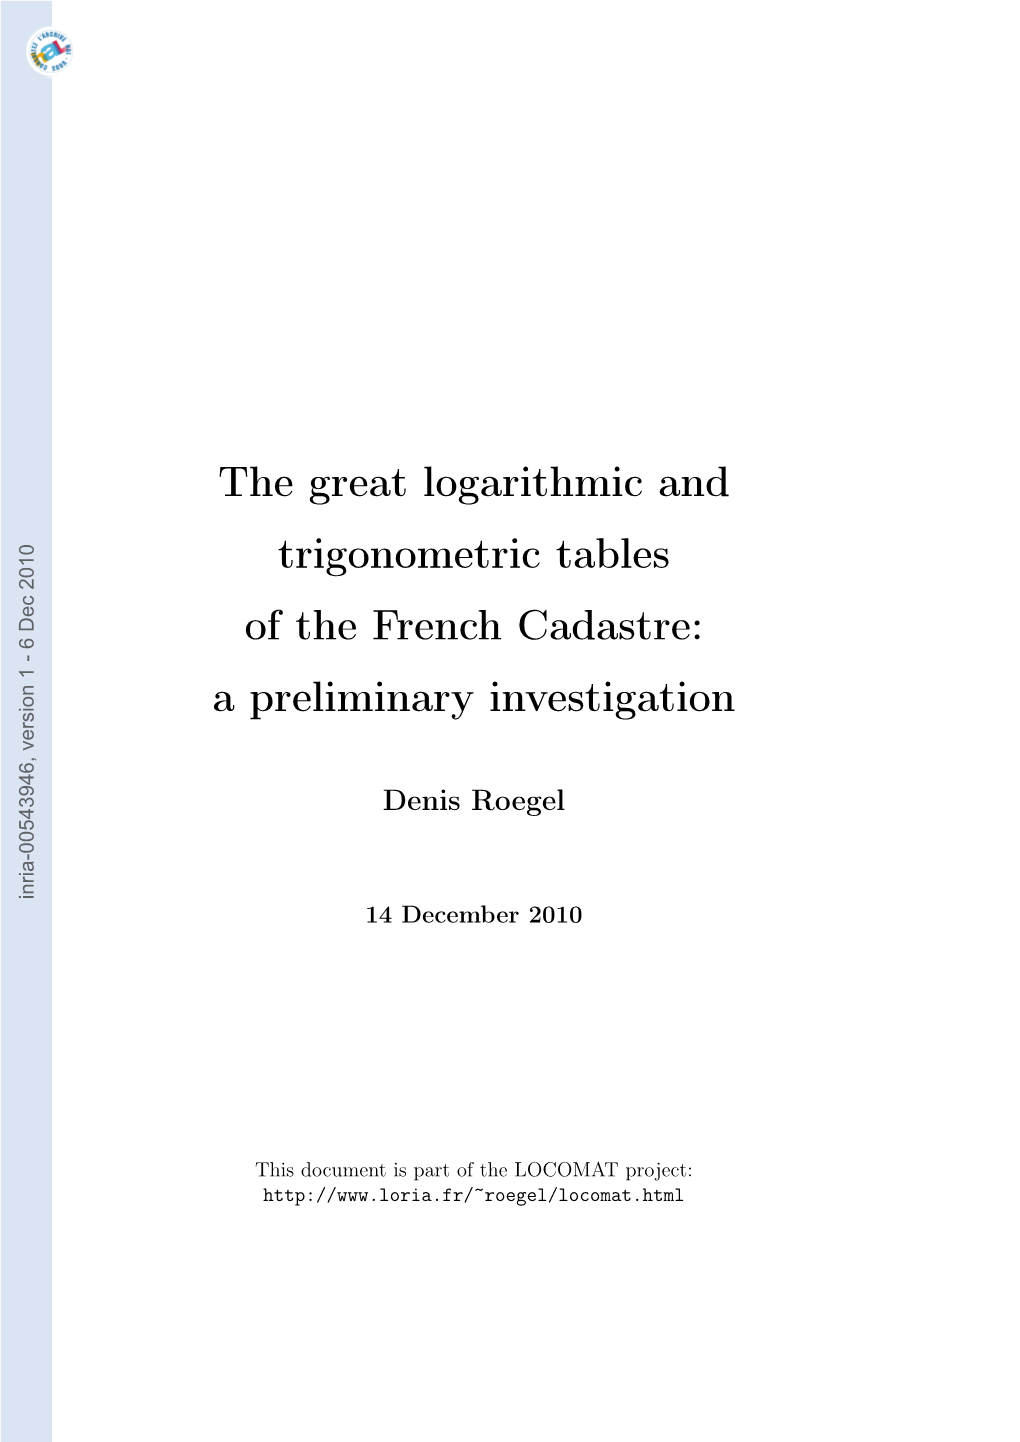 The Great Logarithmic and Trigonometric Tables of the French Cadastre: a Preliminary Investigation